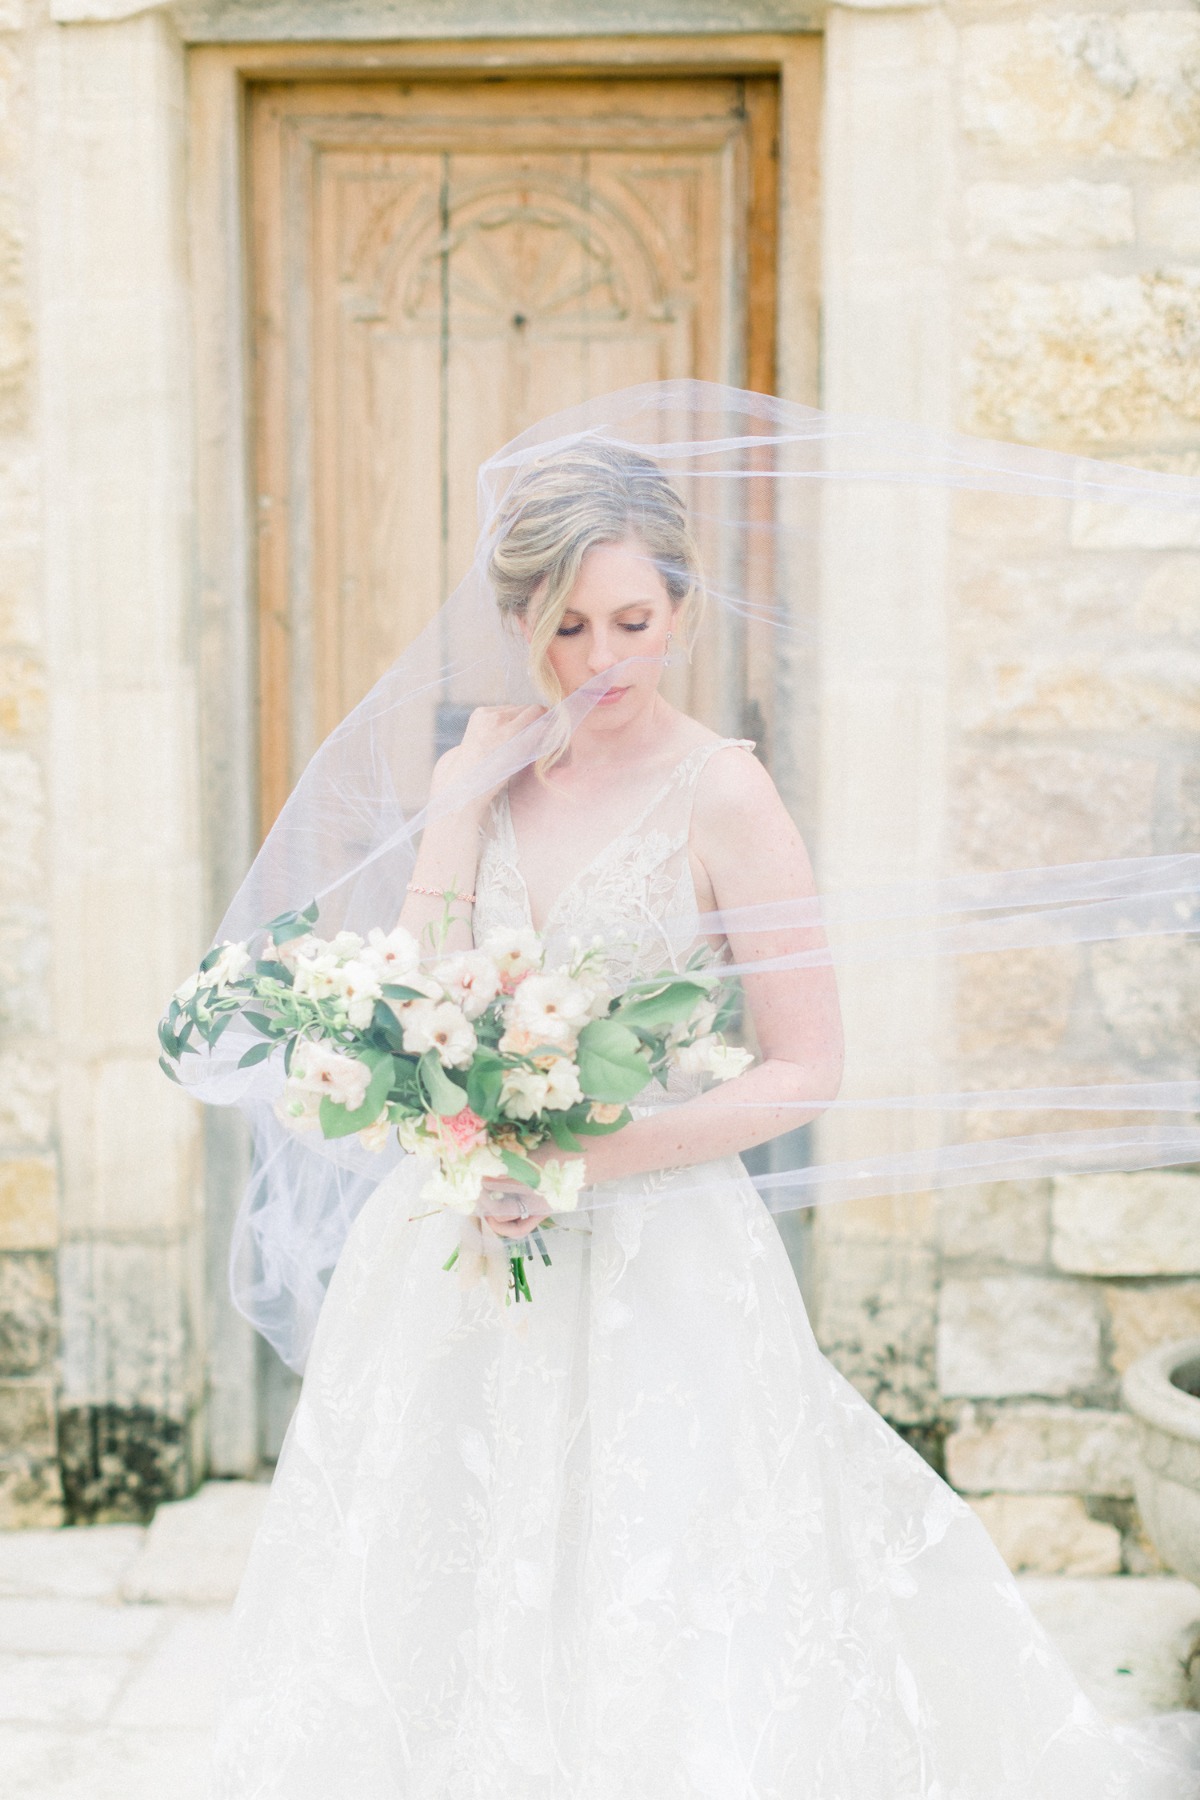 Haley Paige wedding gown with bouquet by Tyler Speier Events